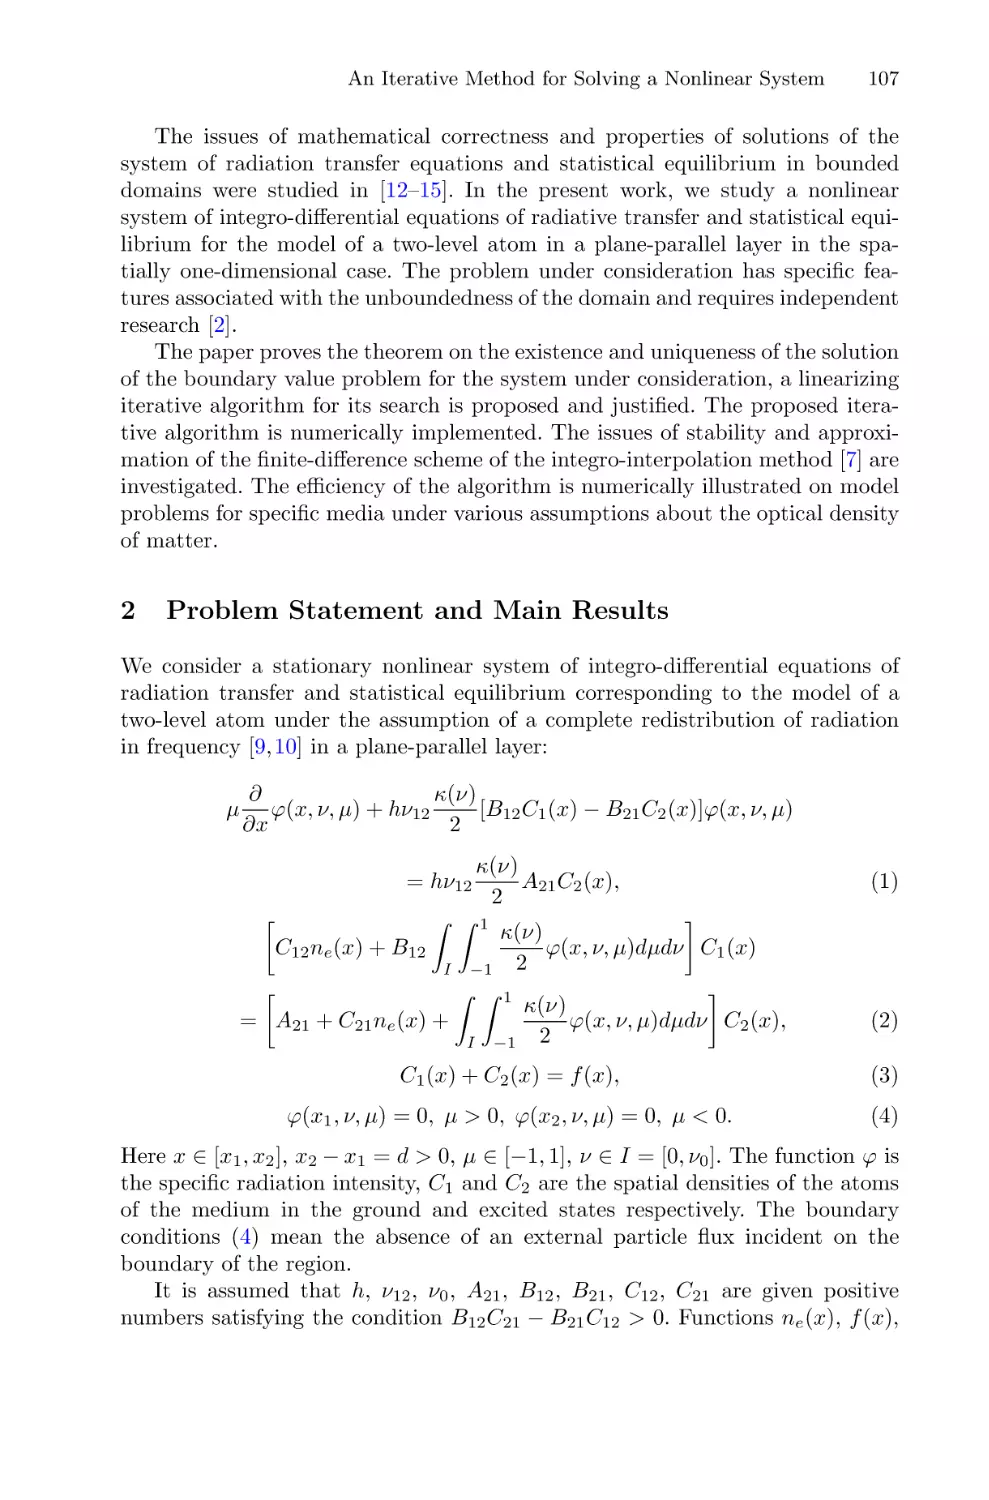 2 Problem Statement and Main Results